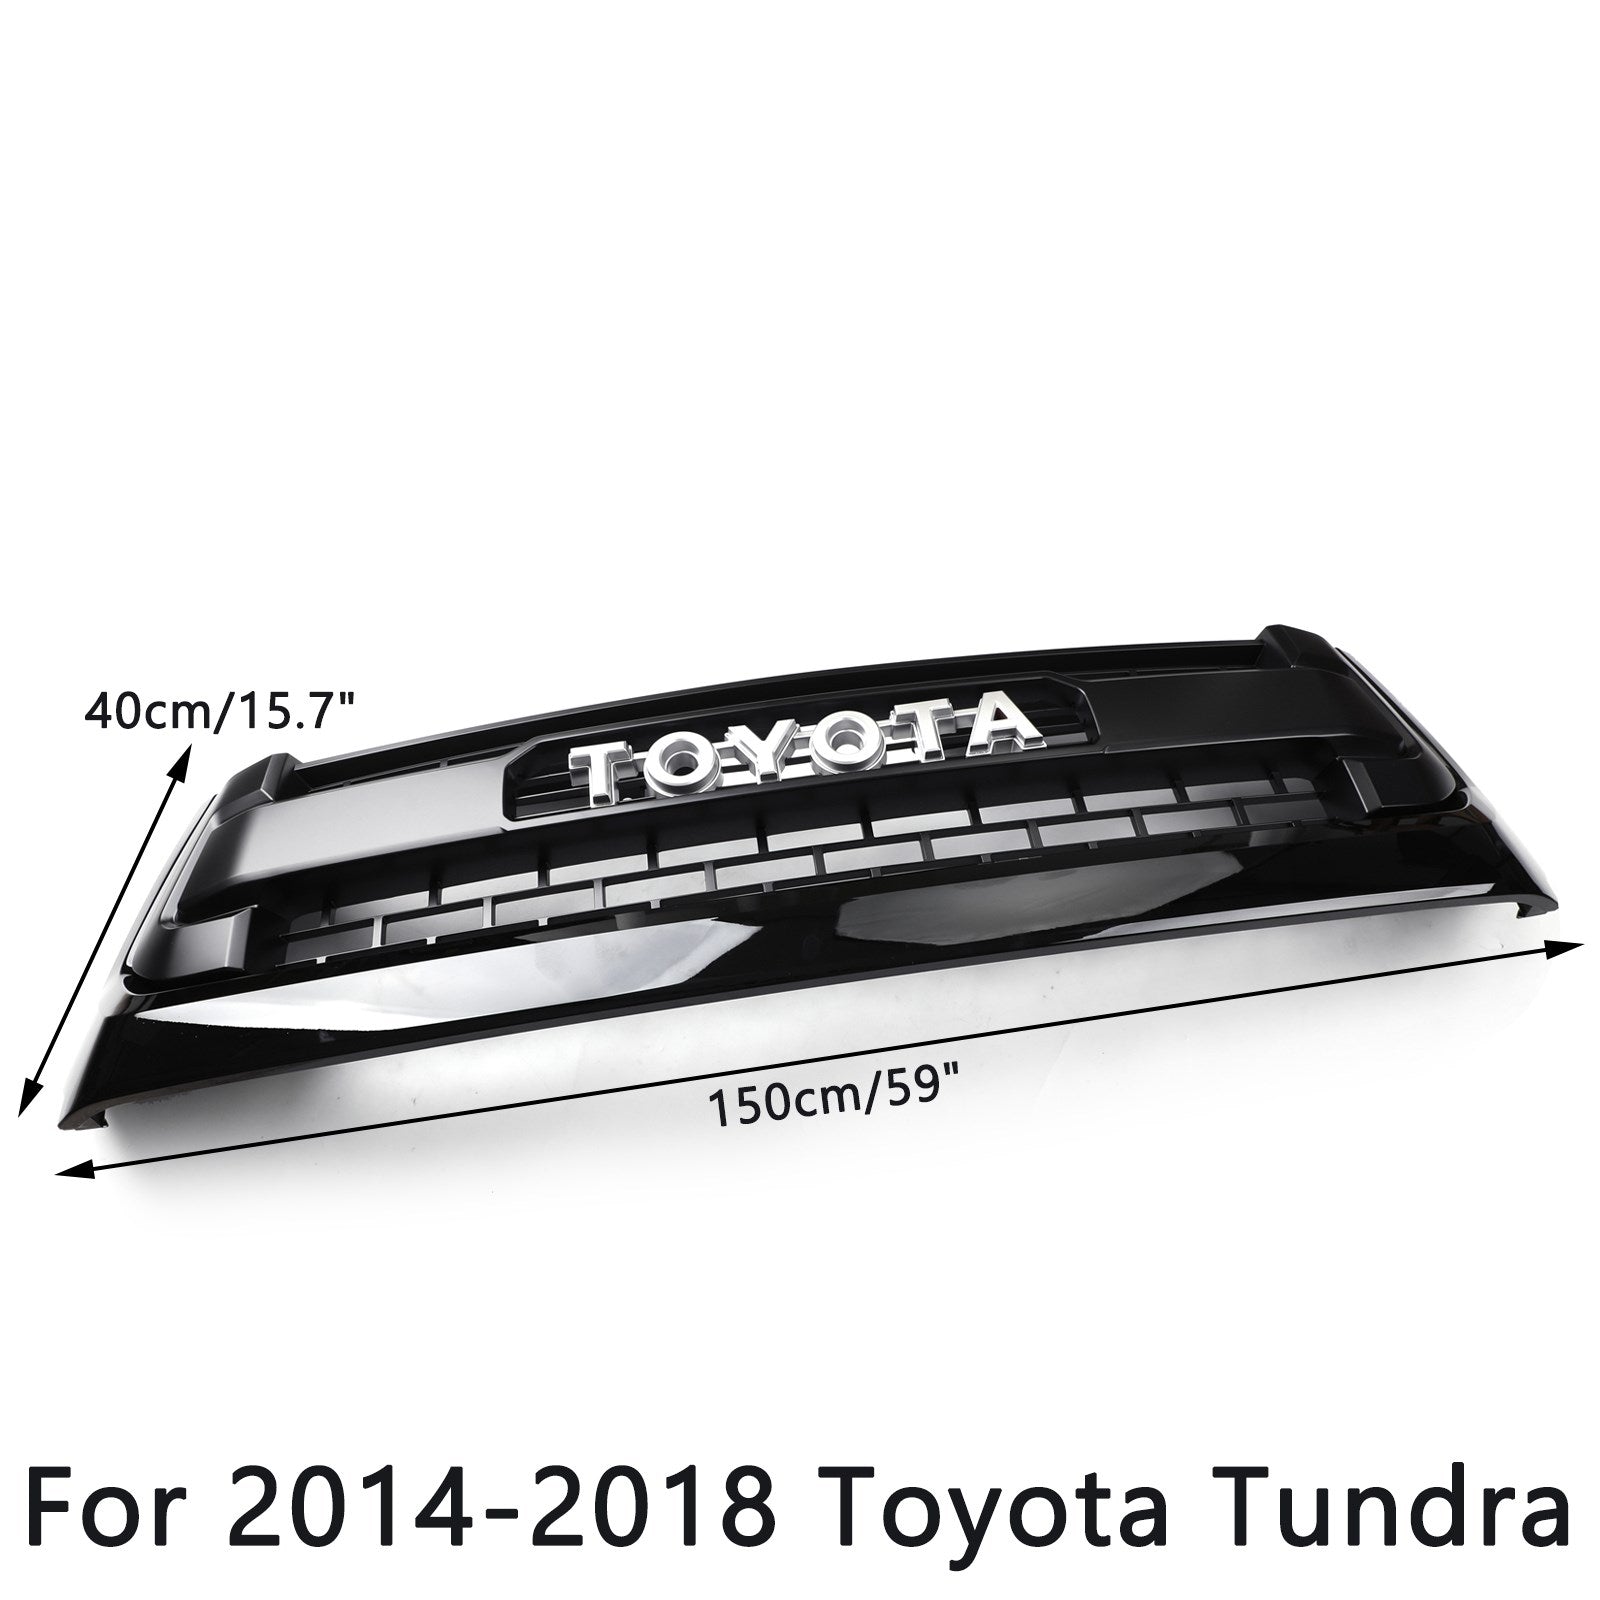 2014-2018 Tundra Honeycomb Toyota Grill Grille Replacement TRD PRO Black Generic